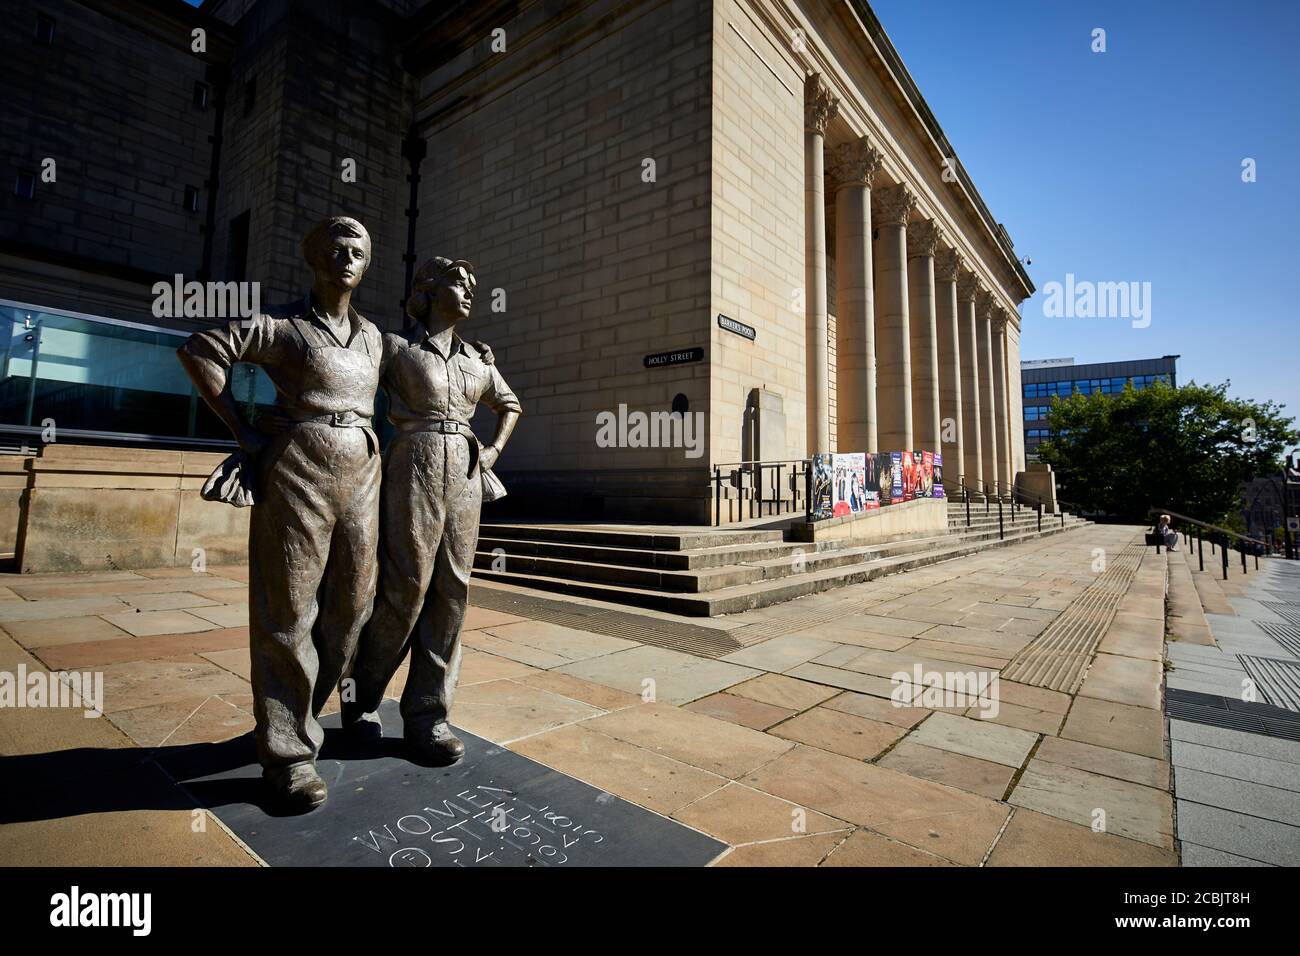 Sheffield, South Yorkshire Women of Steel bronze sculpture by sculptor Martin Jennings, unveiled June 2016 outside Sheffield City Hall Stock Photo